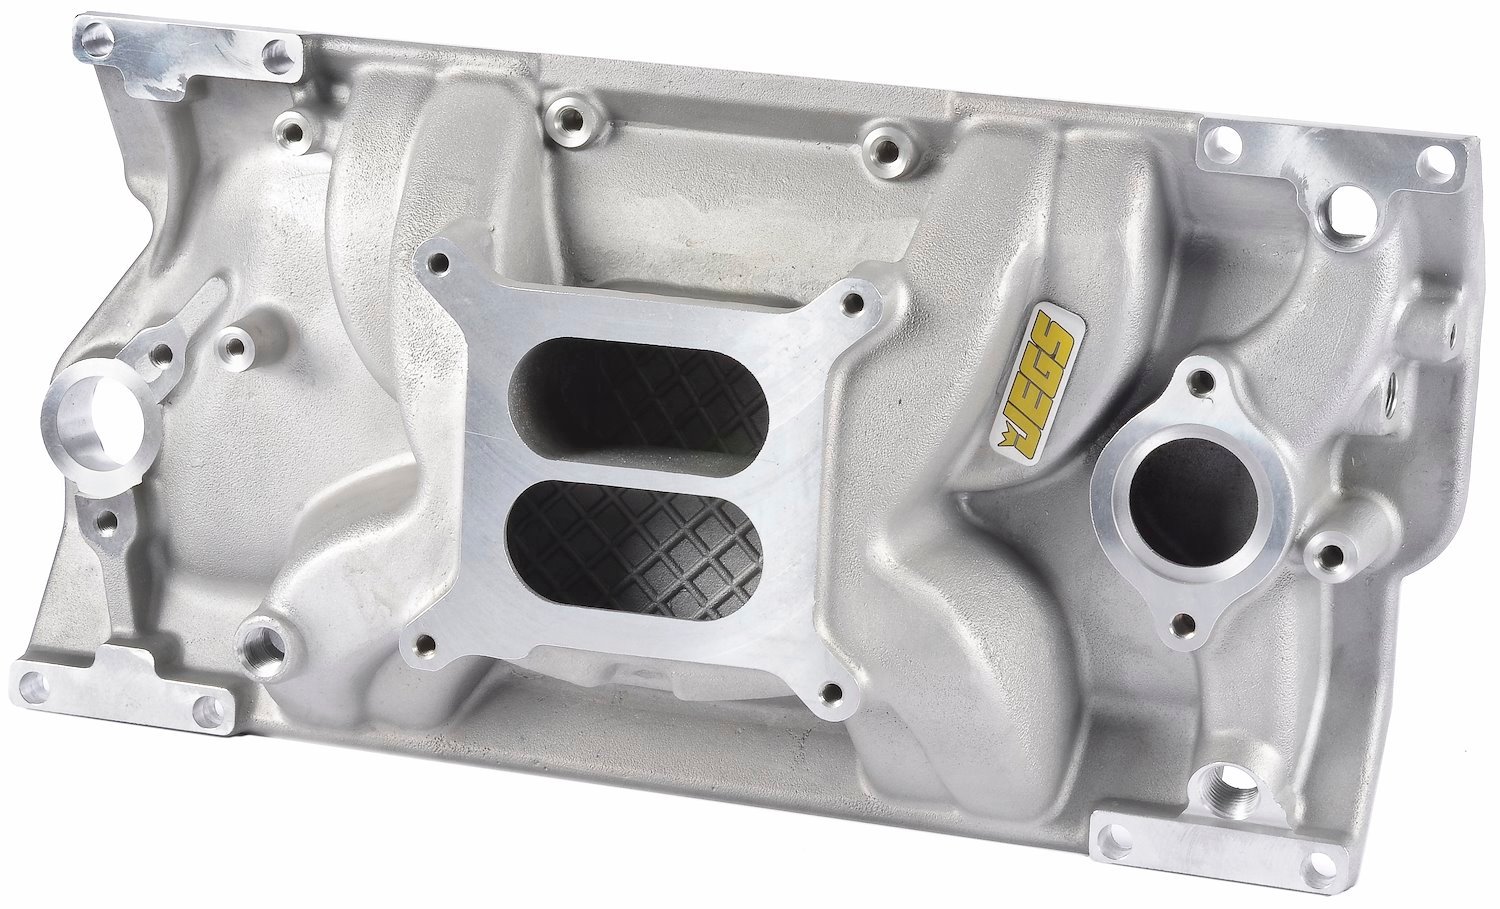 Intake Manifold for 1996-2002 Small Block Chevy 350 Vortec with L31 Cast Iron Heads, Dual Plane [Satin]